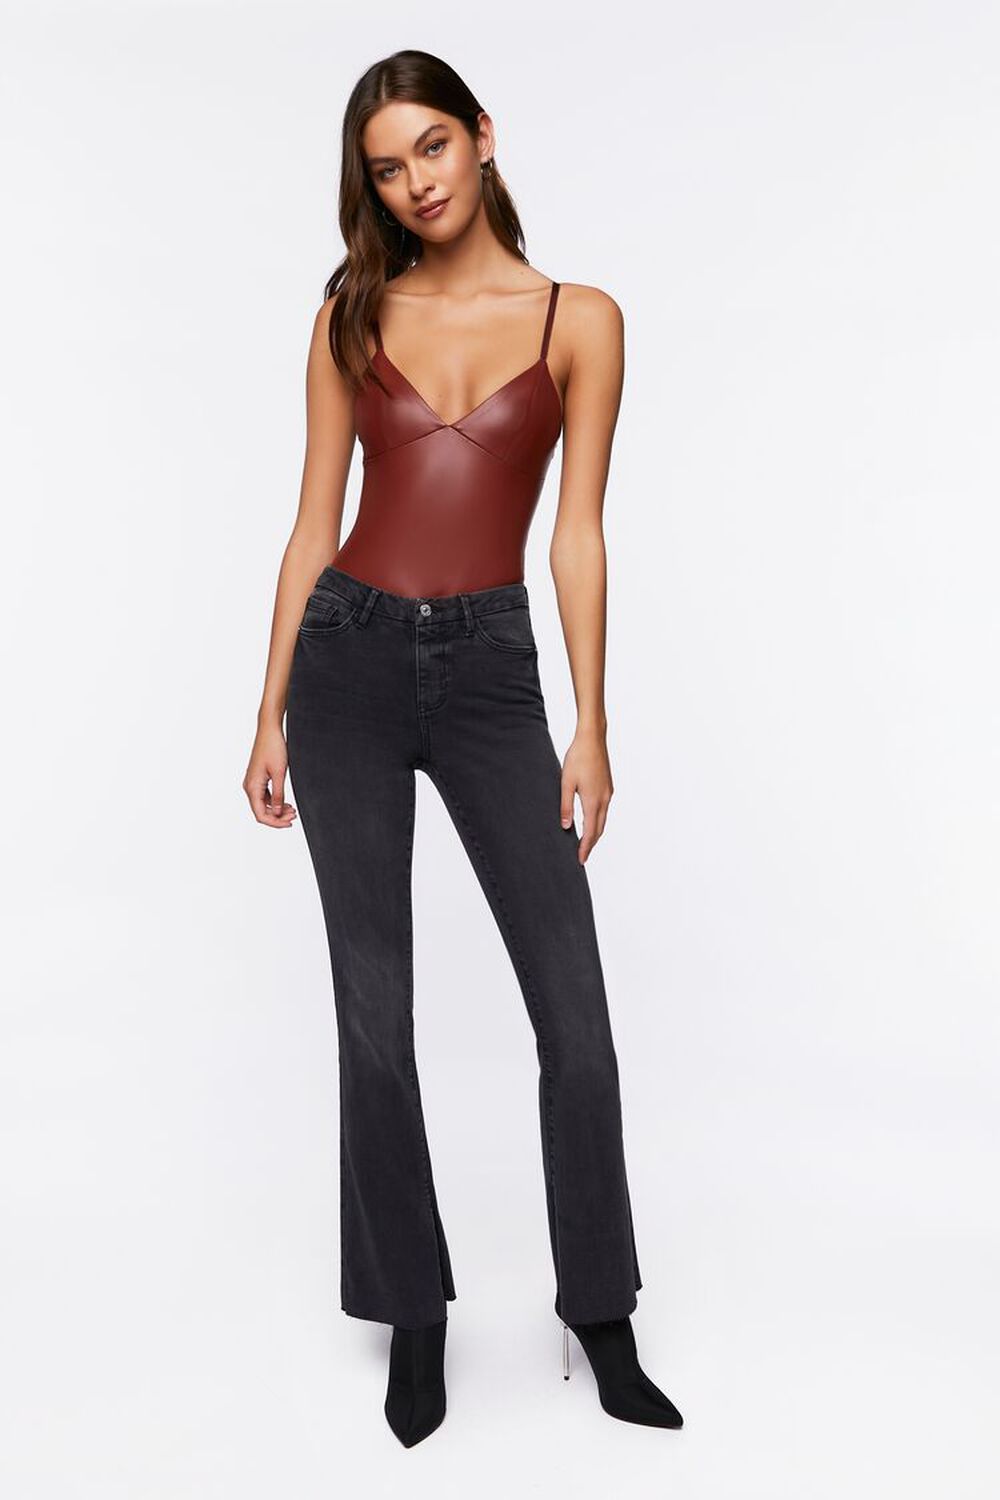 WASHED BLACK Curvy High-Rise Bootcut Jeans, image 2